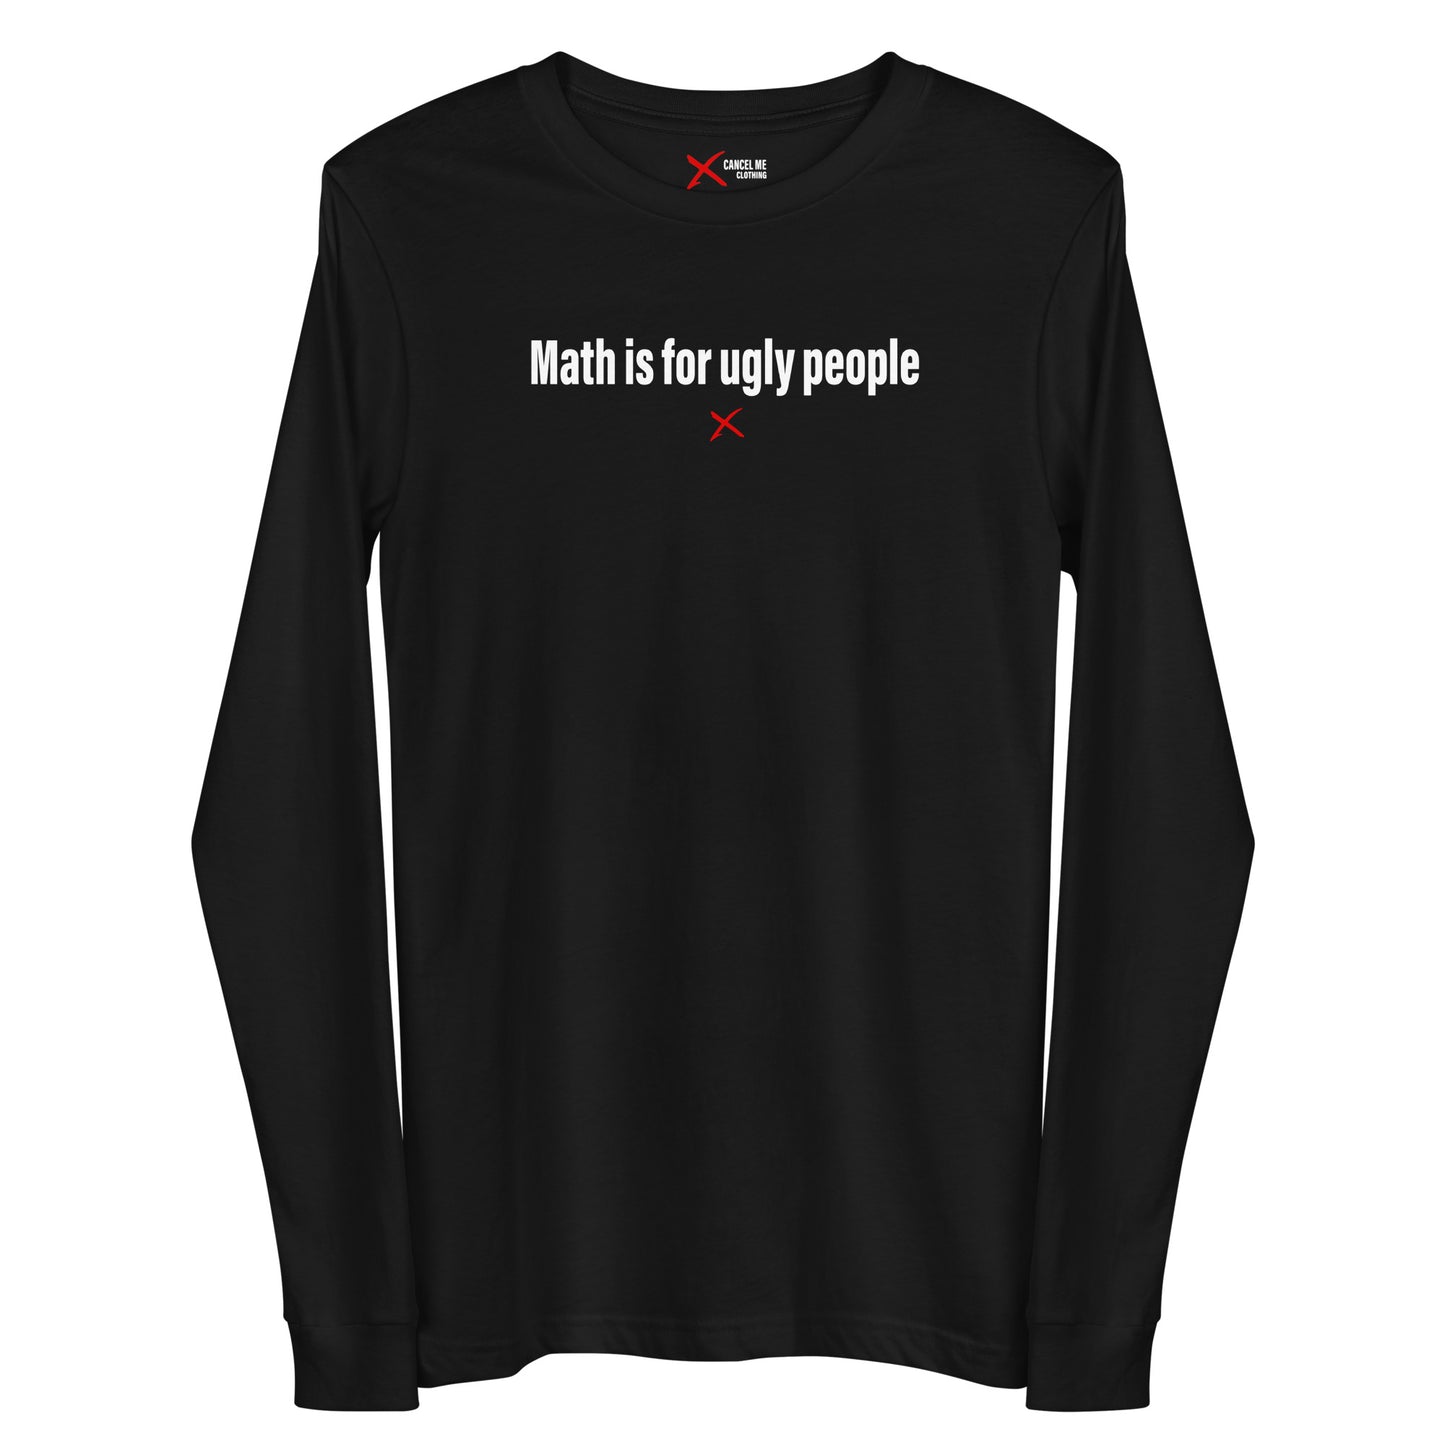 Math is for ugly people - Longsleeve